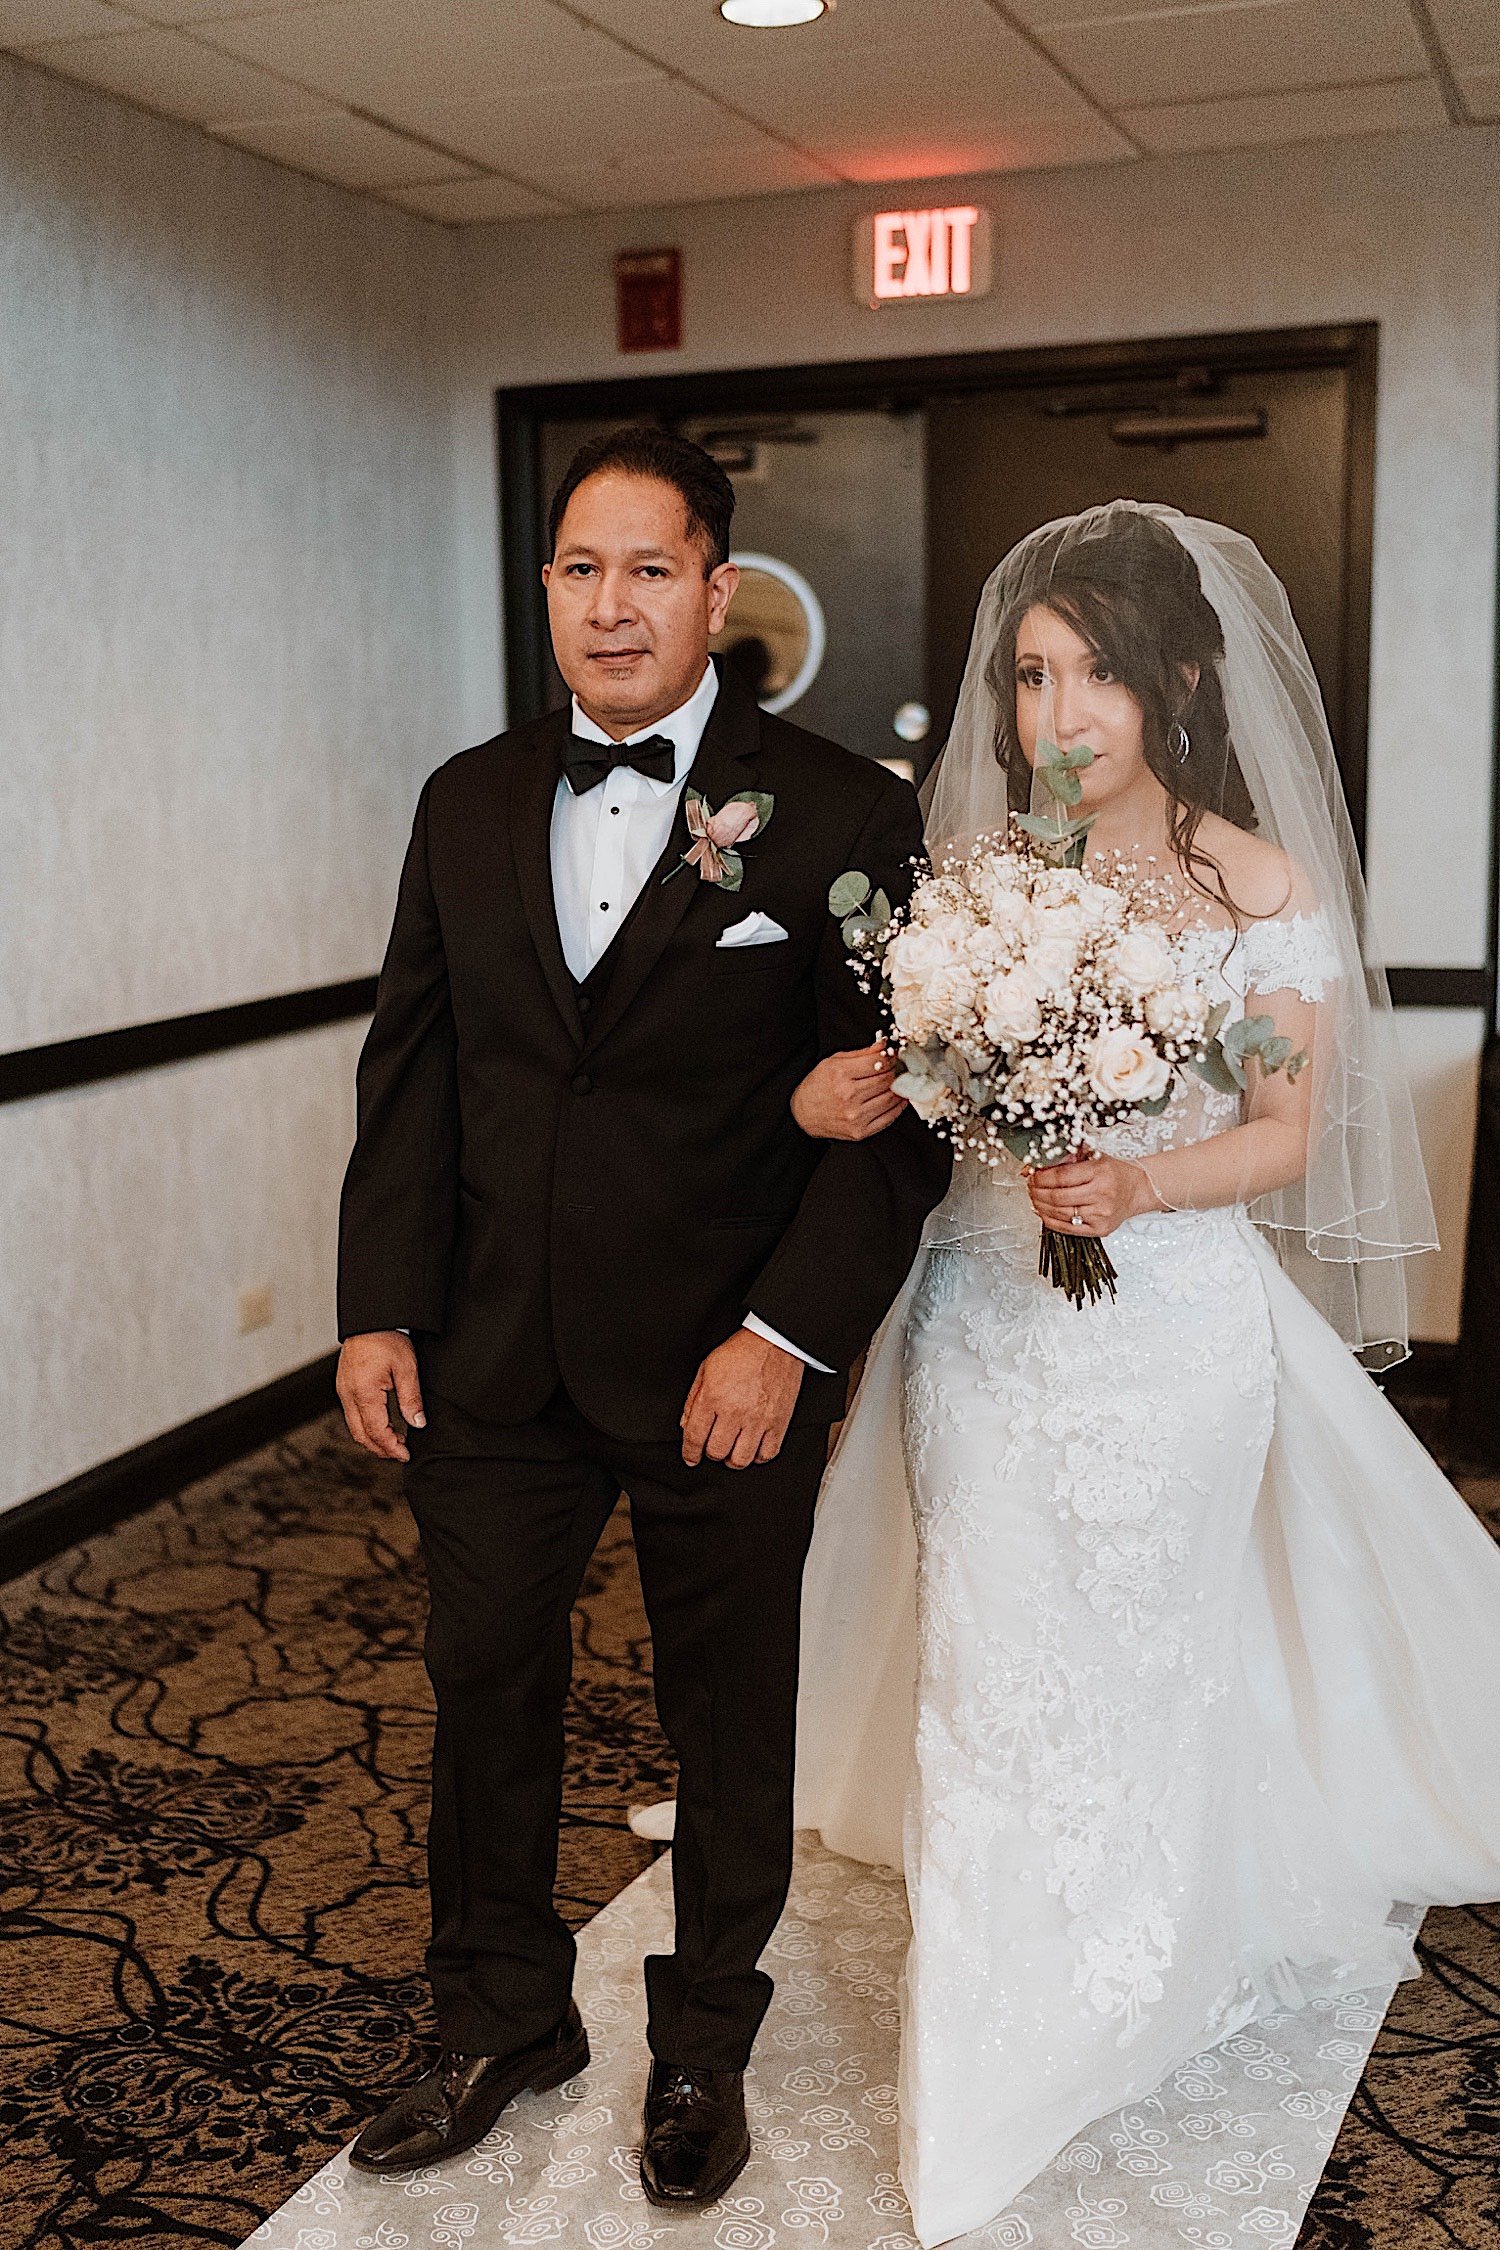 Bride enters her ballroom wedding ceremony escorted by her father while holding a bouquet of flowers